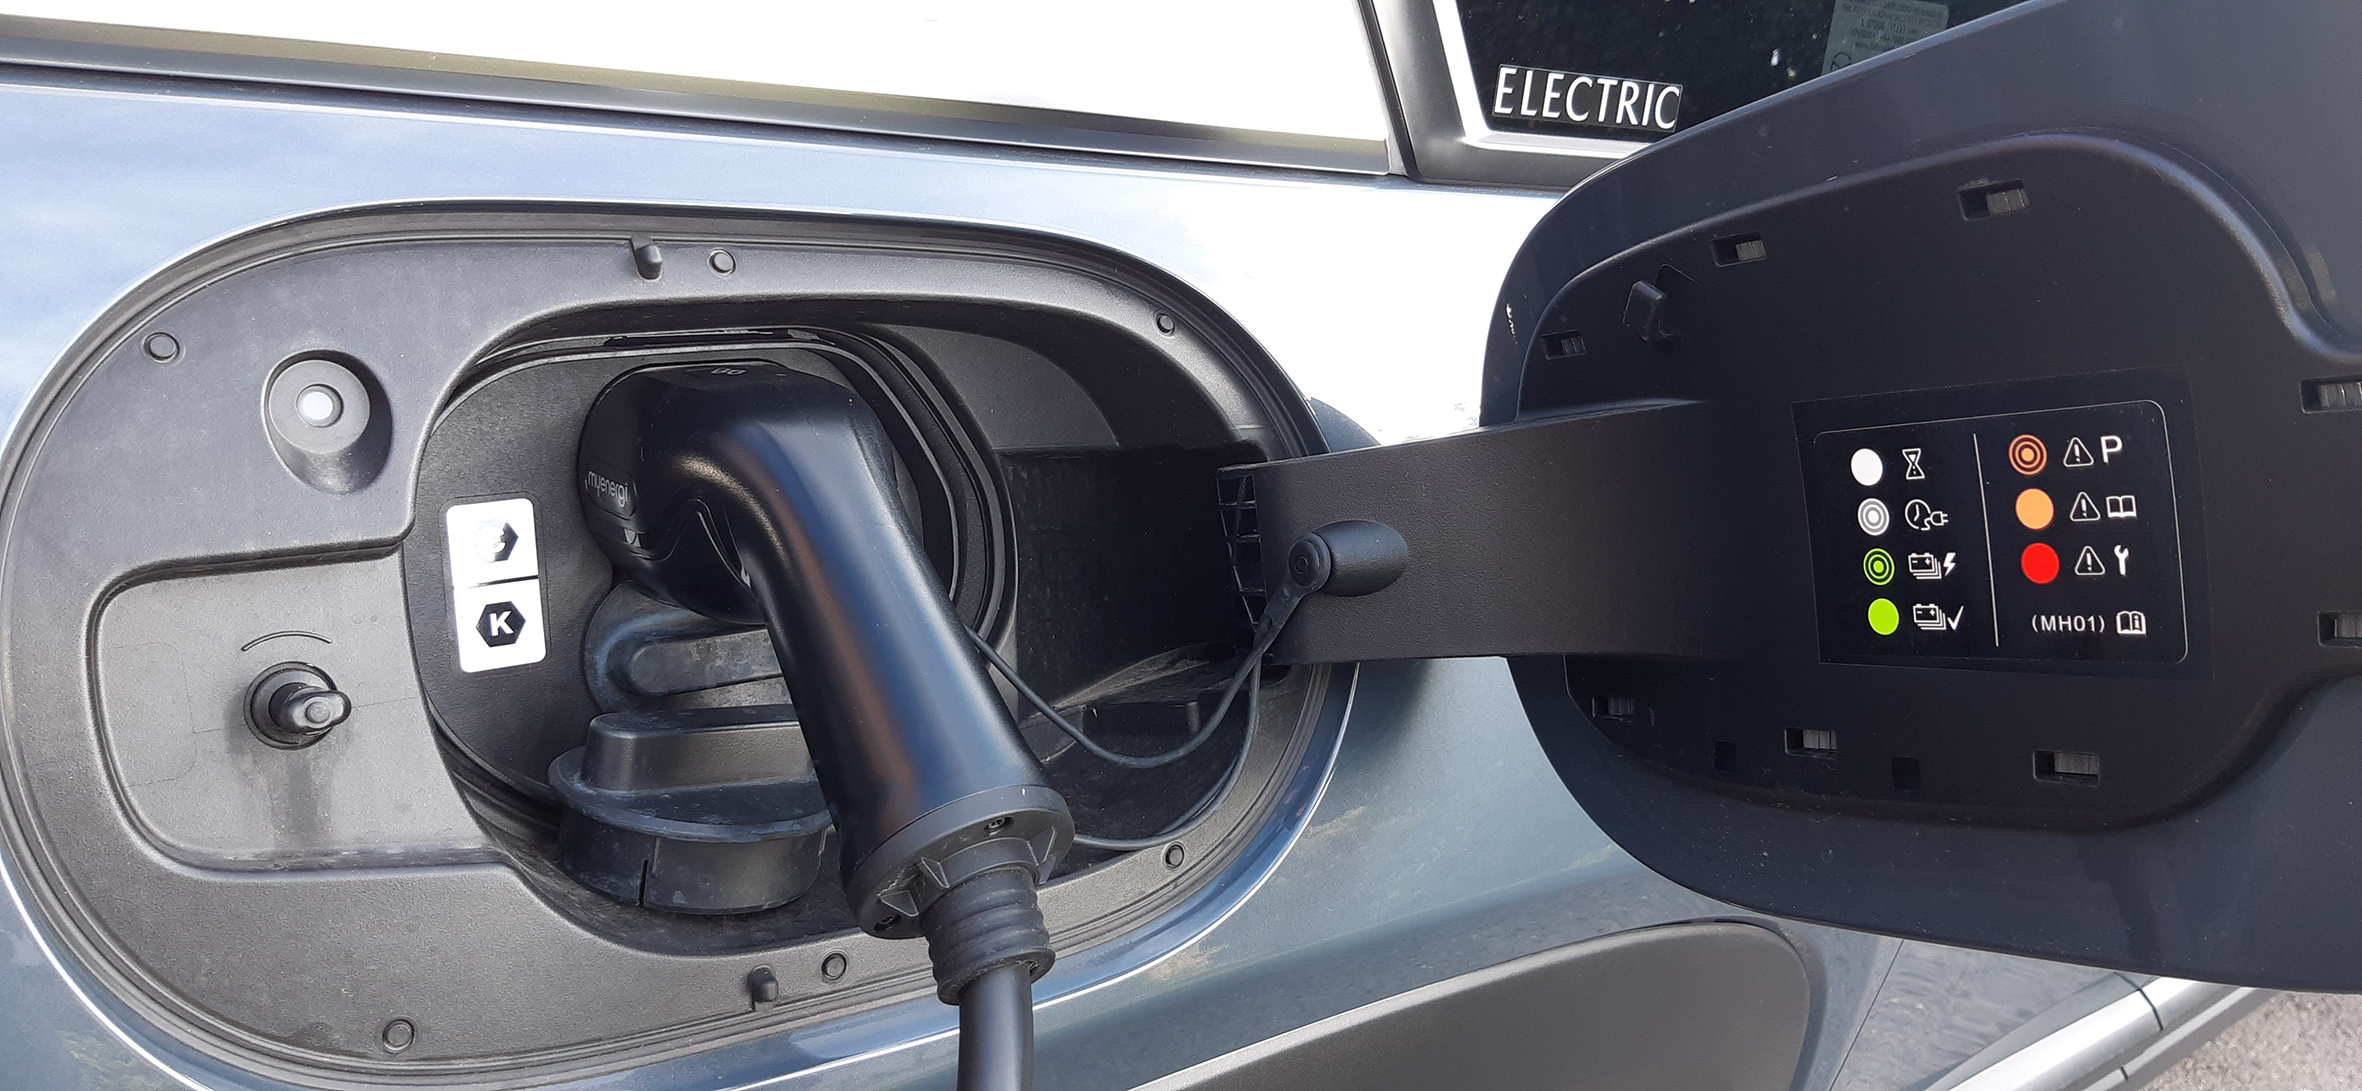 An electric vehicle charge point